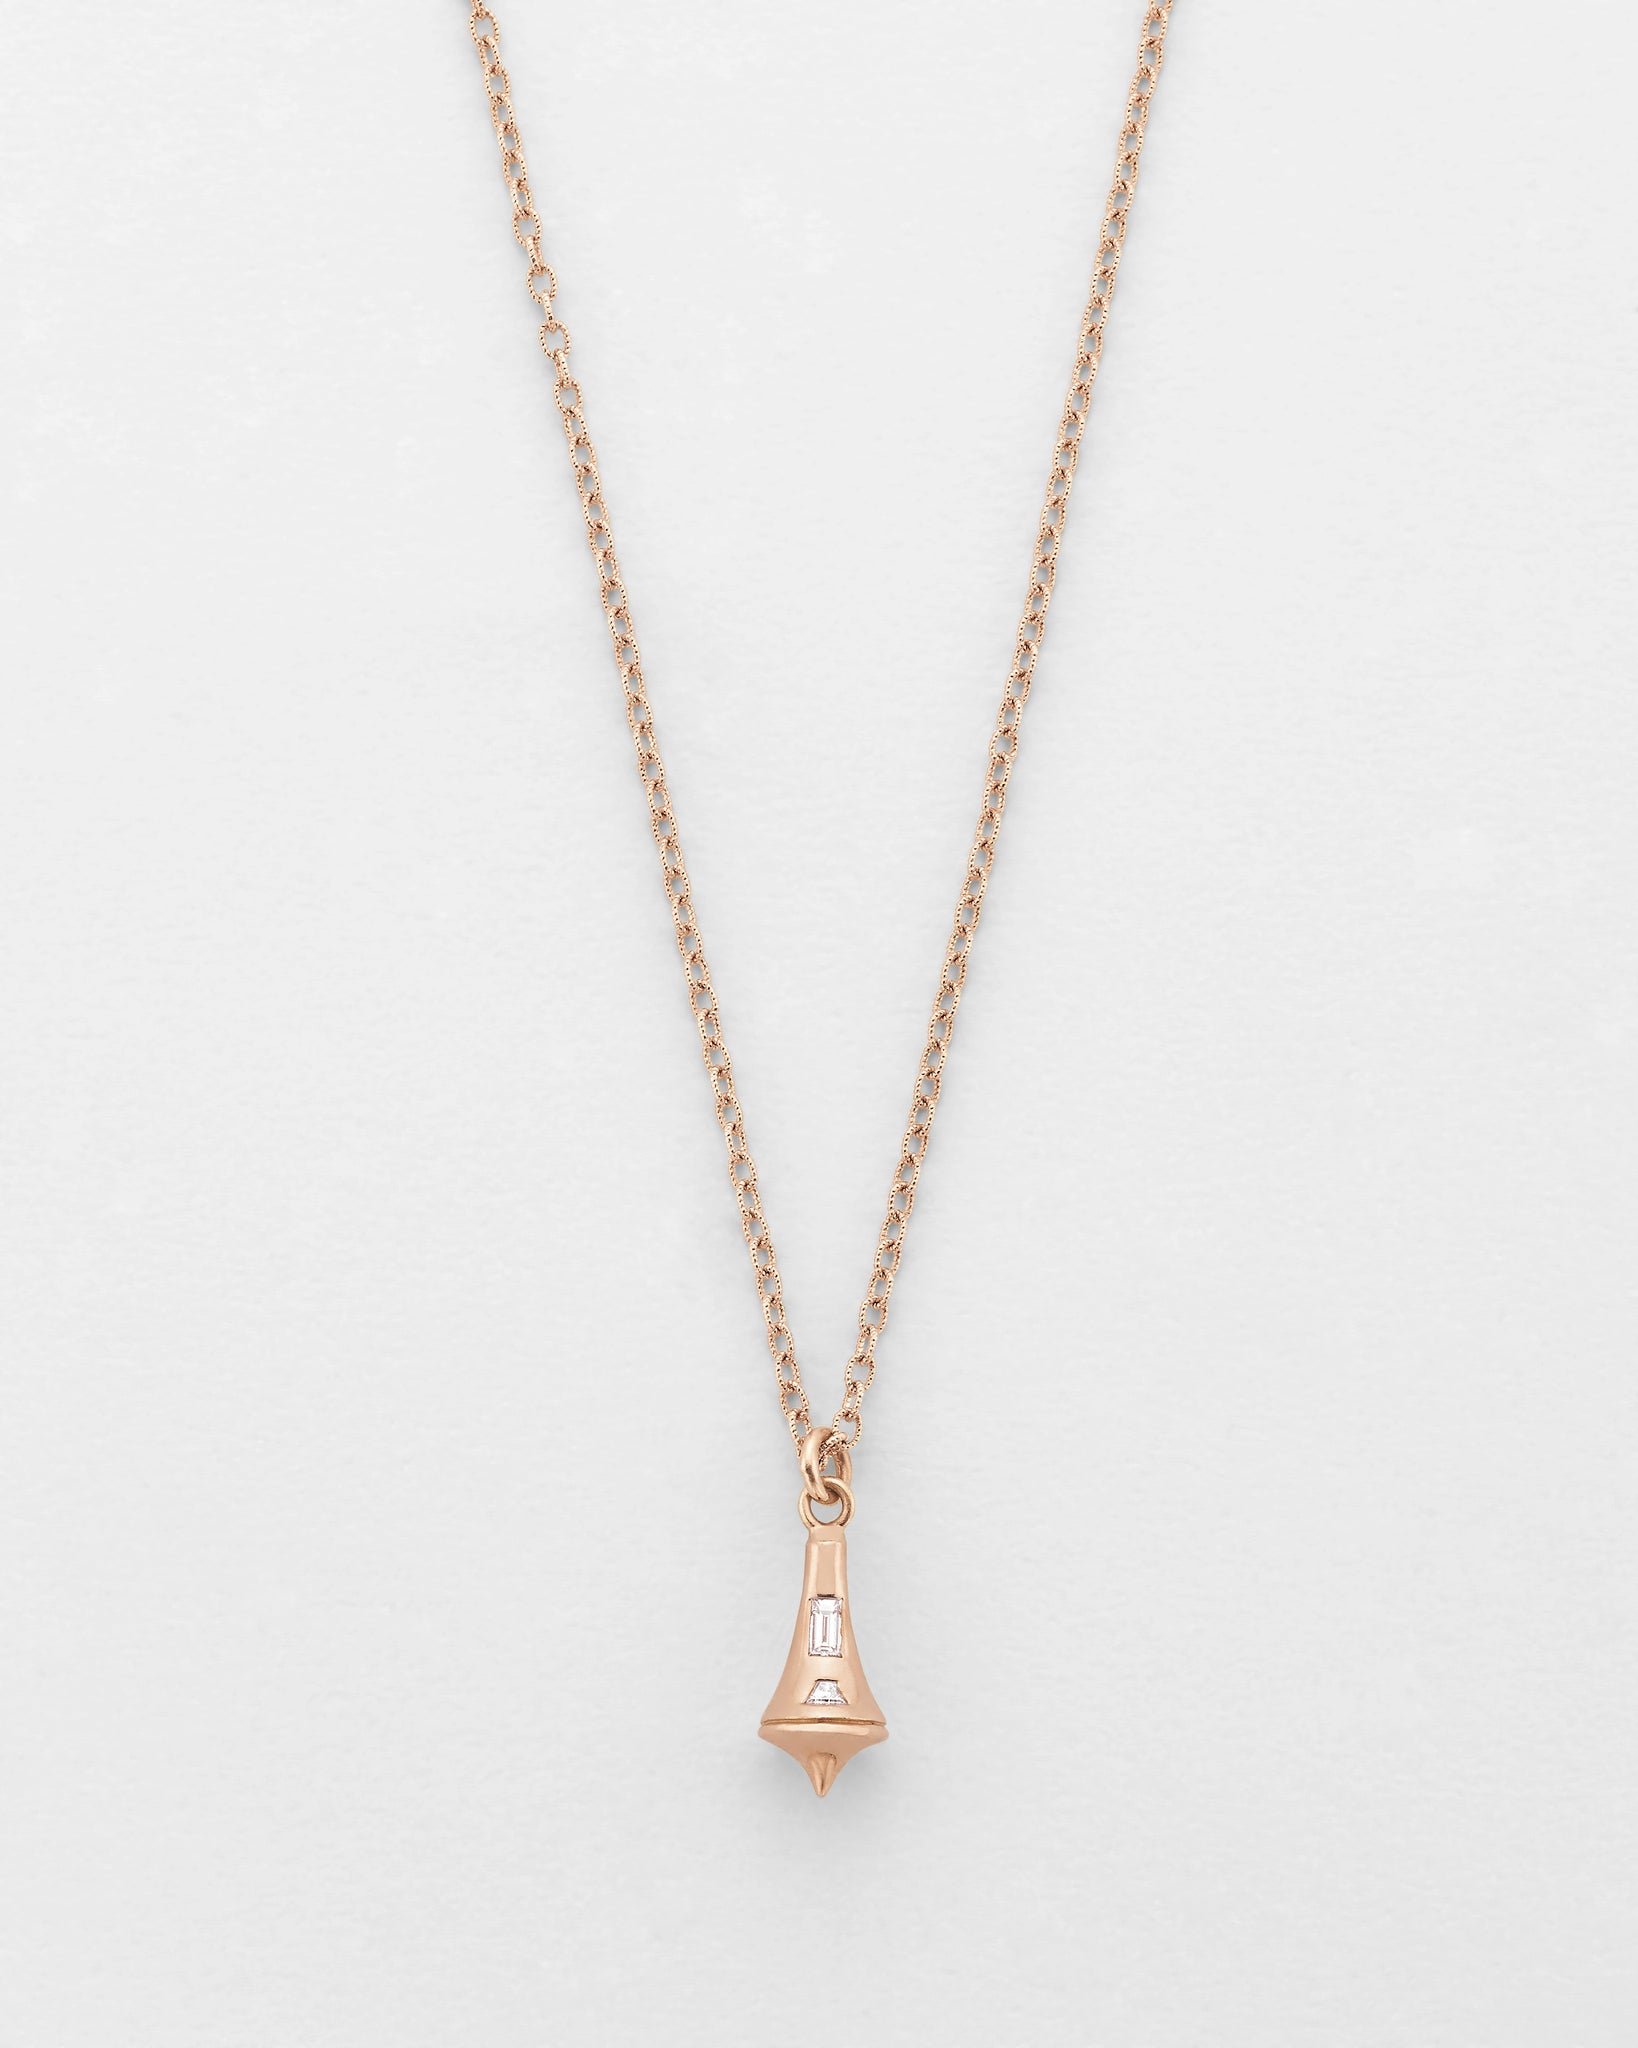 Chain Reaction Pendulum Bell Necklace